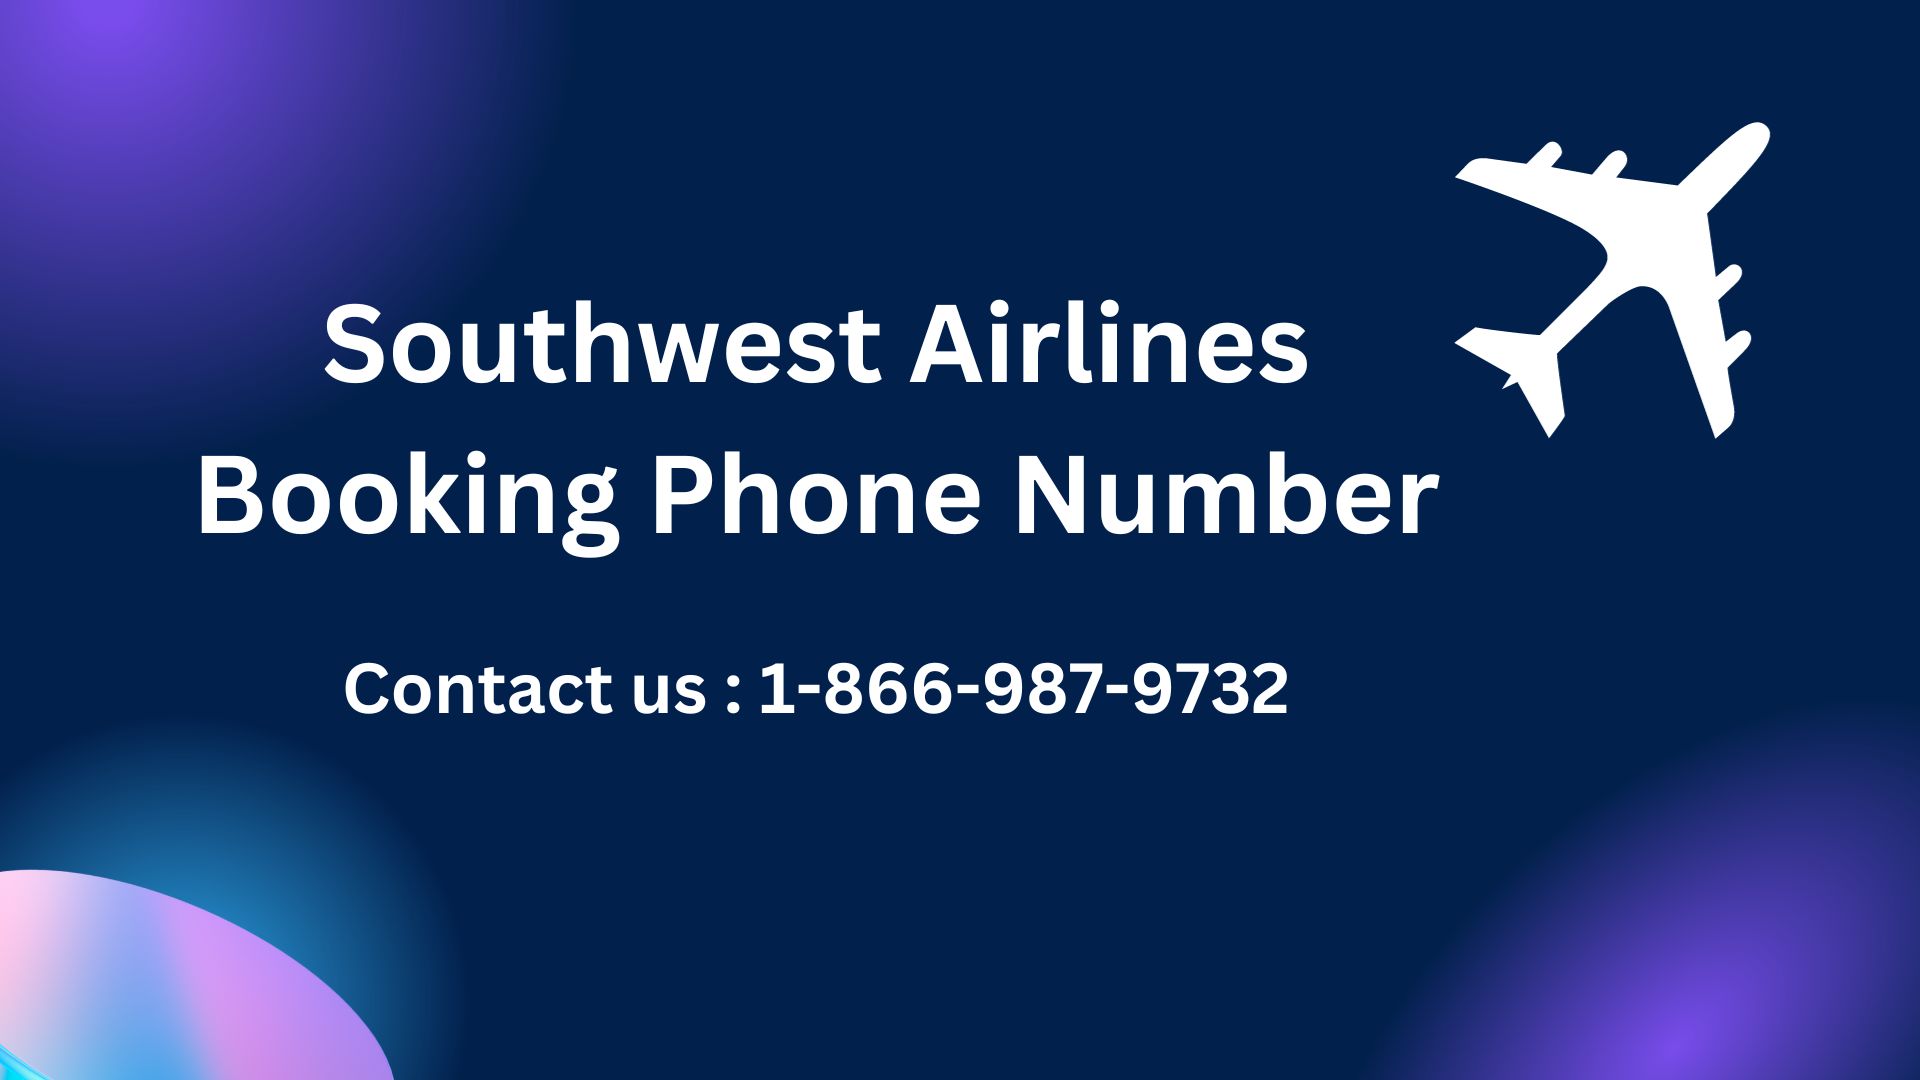 Southwest Airlines Booking Phone Number